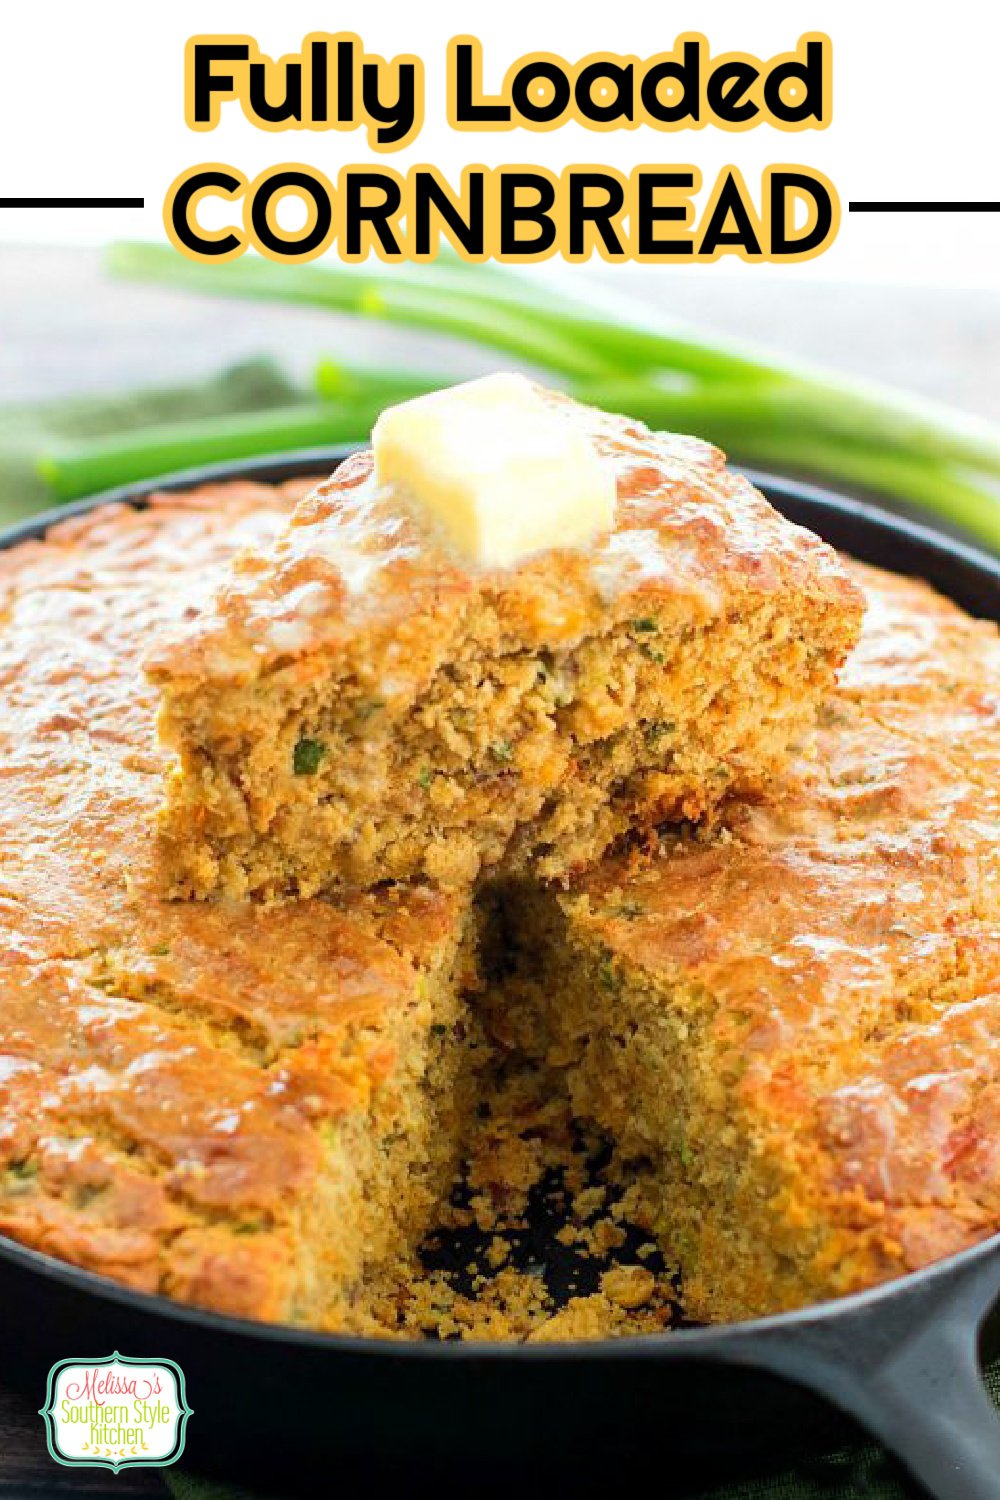 This Fully Loaded Cornbread makes the perfect sidekick for soup, stew, chili and beans #cornbread #southerncornbread #cornbreadrecipes #loadedcornbread #southernfood #southernrecipes #bacon #sidedishrecipes #castironcooking #castironcornbread